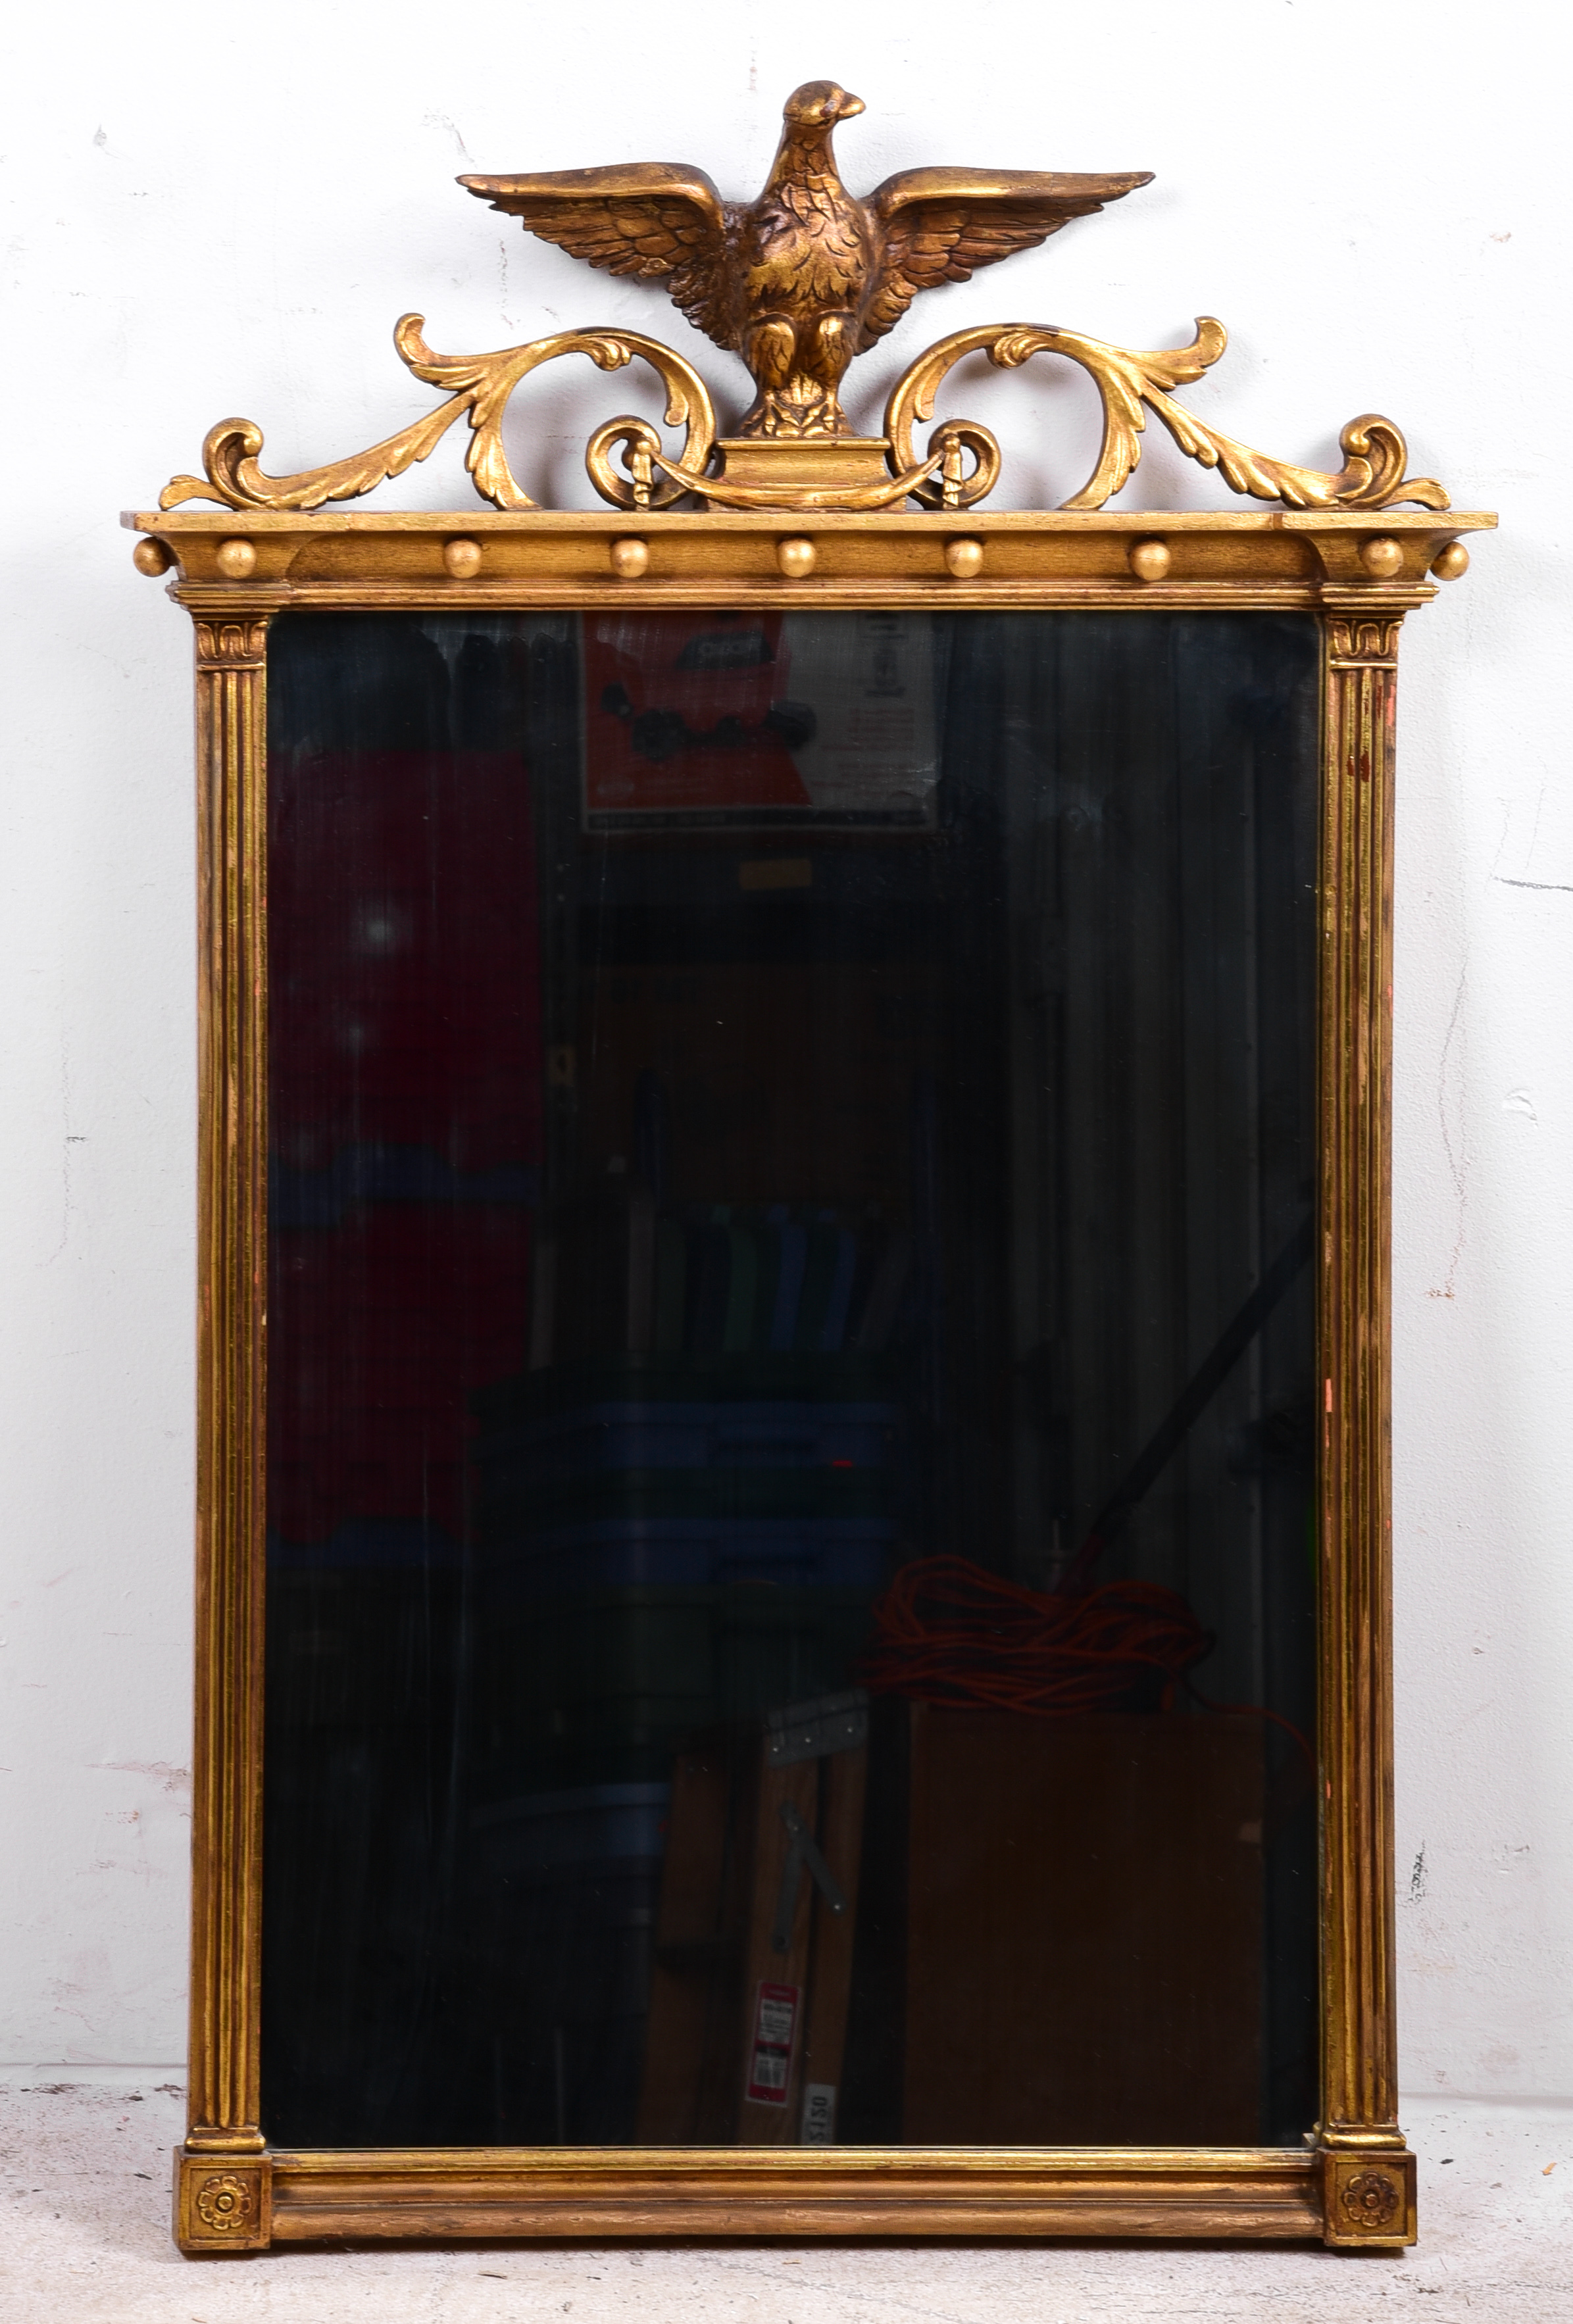 Federal style gilt hanging wall 3ca57b